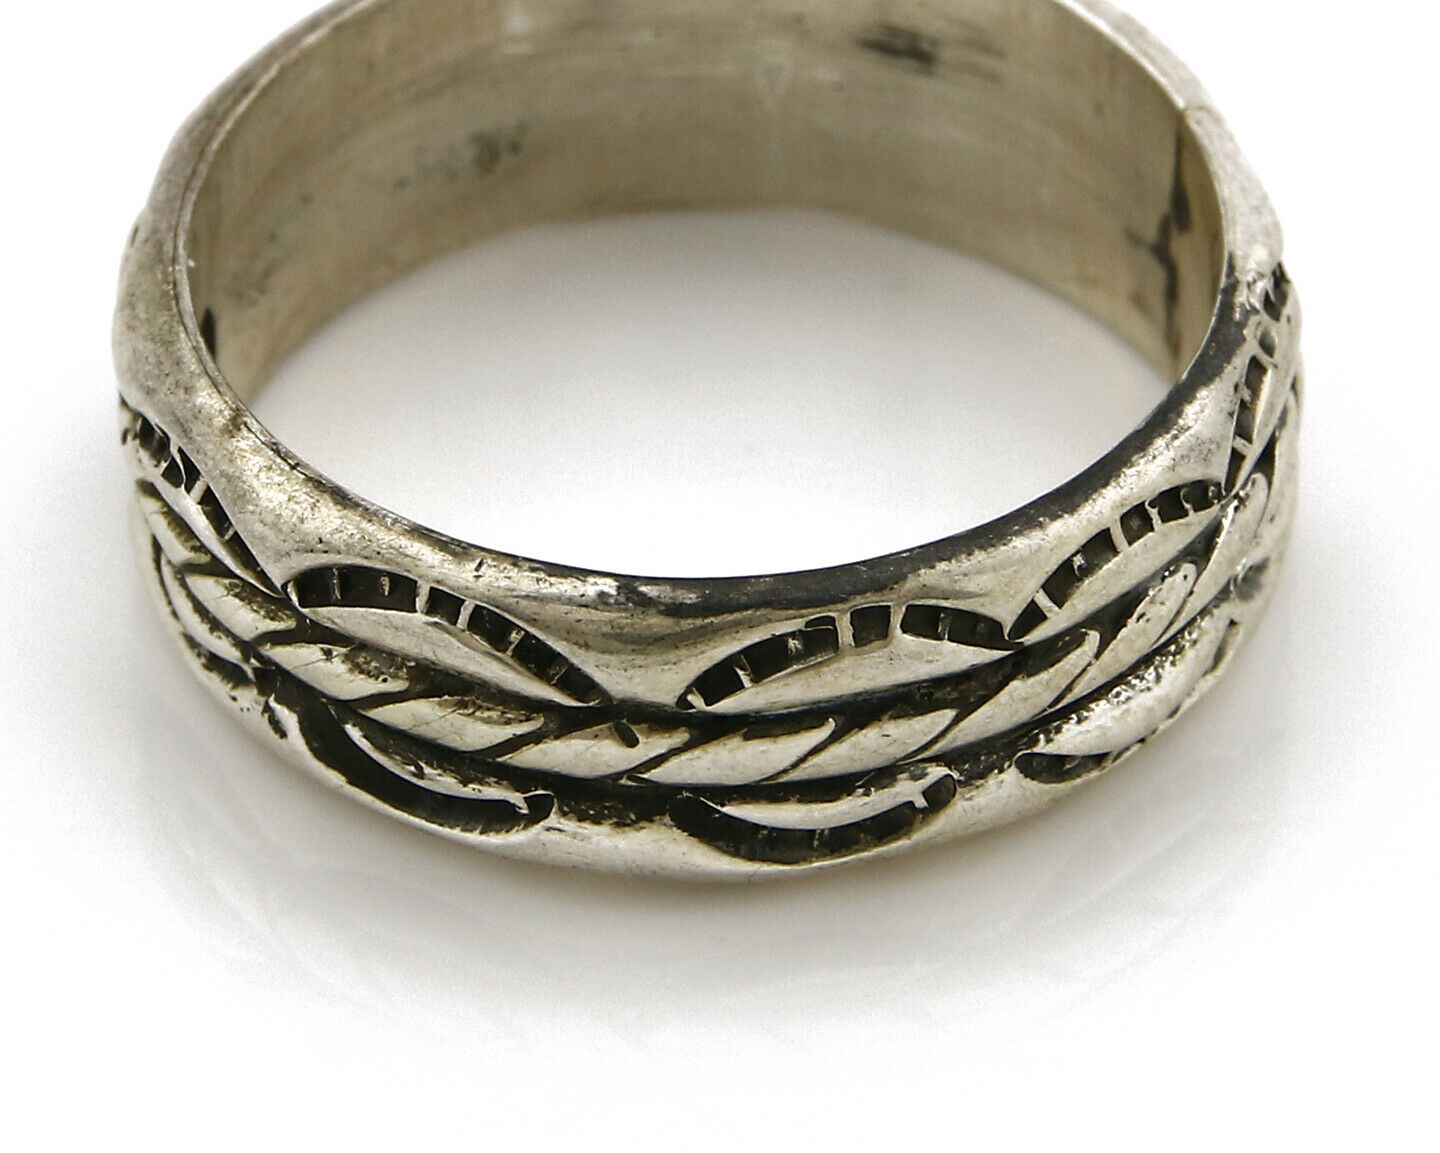 Navajo Ring .925 Silver Handmade Hand Stamped 3 Row Rope Band C.1980's Size 14.5